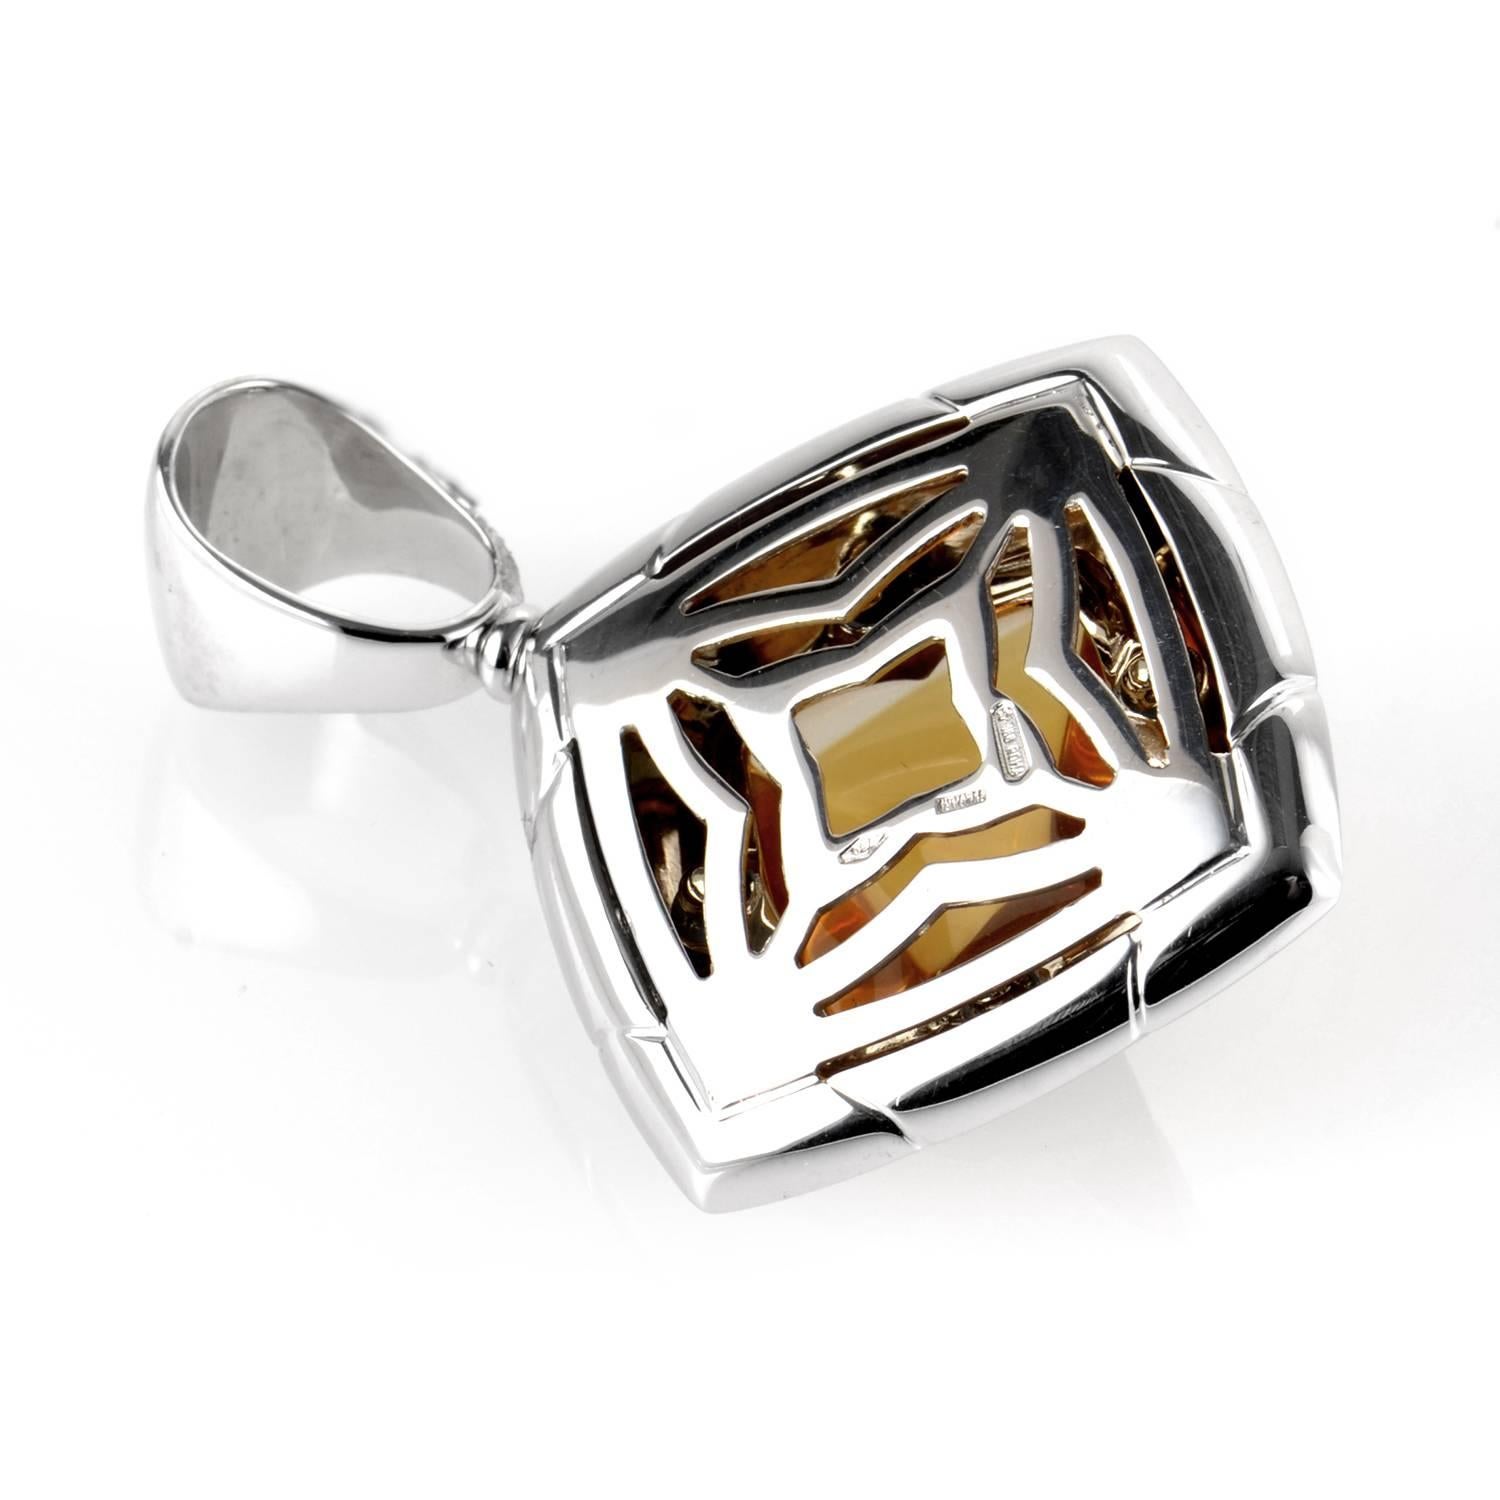 This chainless pendant from Bvlgari's Piramide Collection is unique and one of a kind. It is made of 18K white gold and boasts a ~7.10ct citrine stone. This piece would go wonderfully with other pieces from Bvlgari's Piramide Collection.